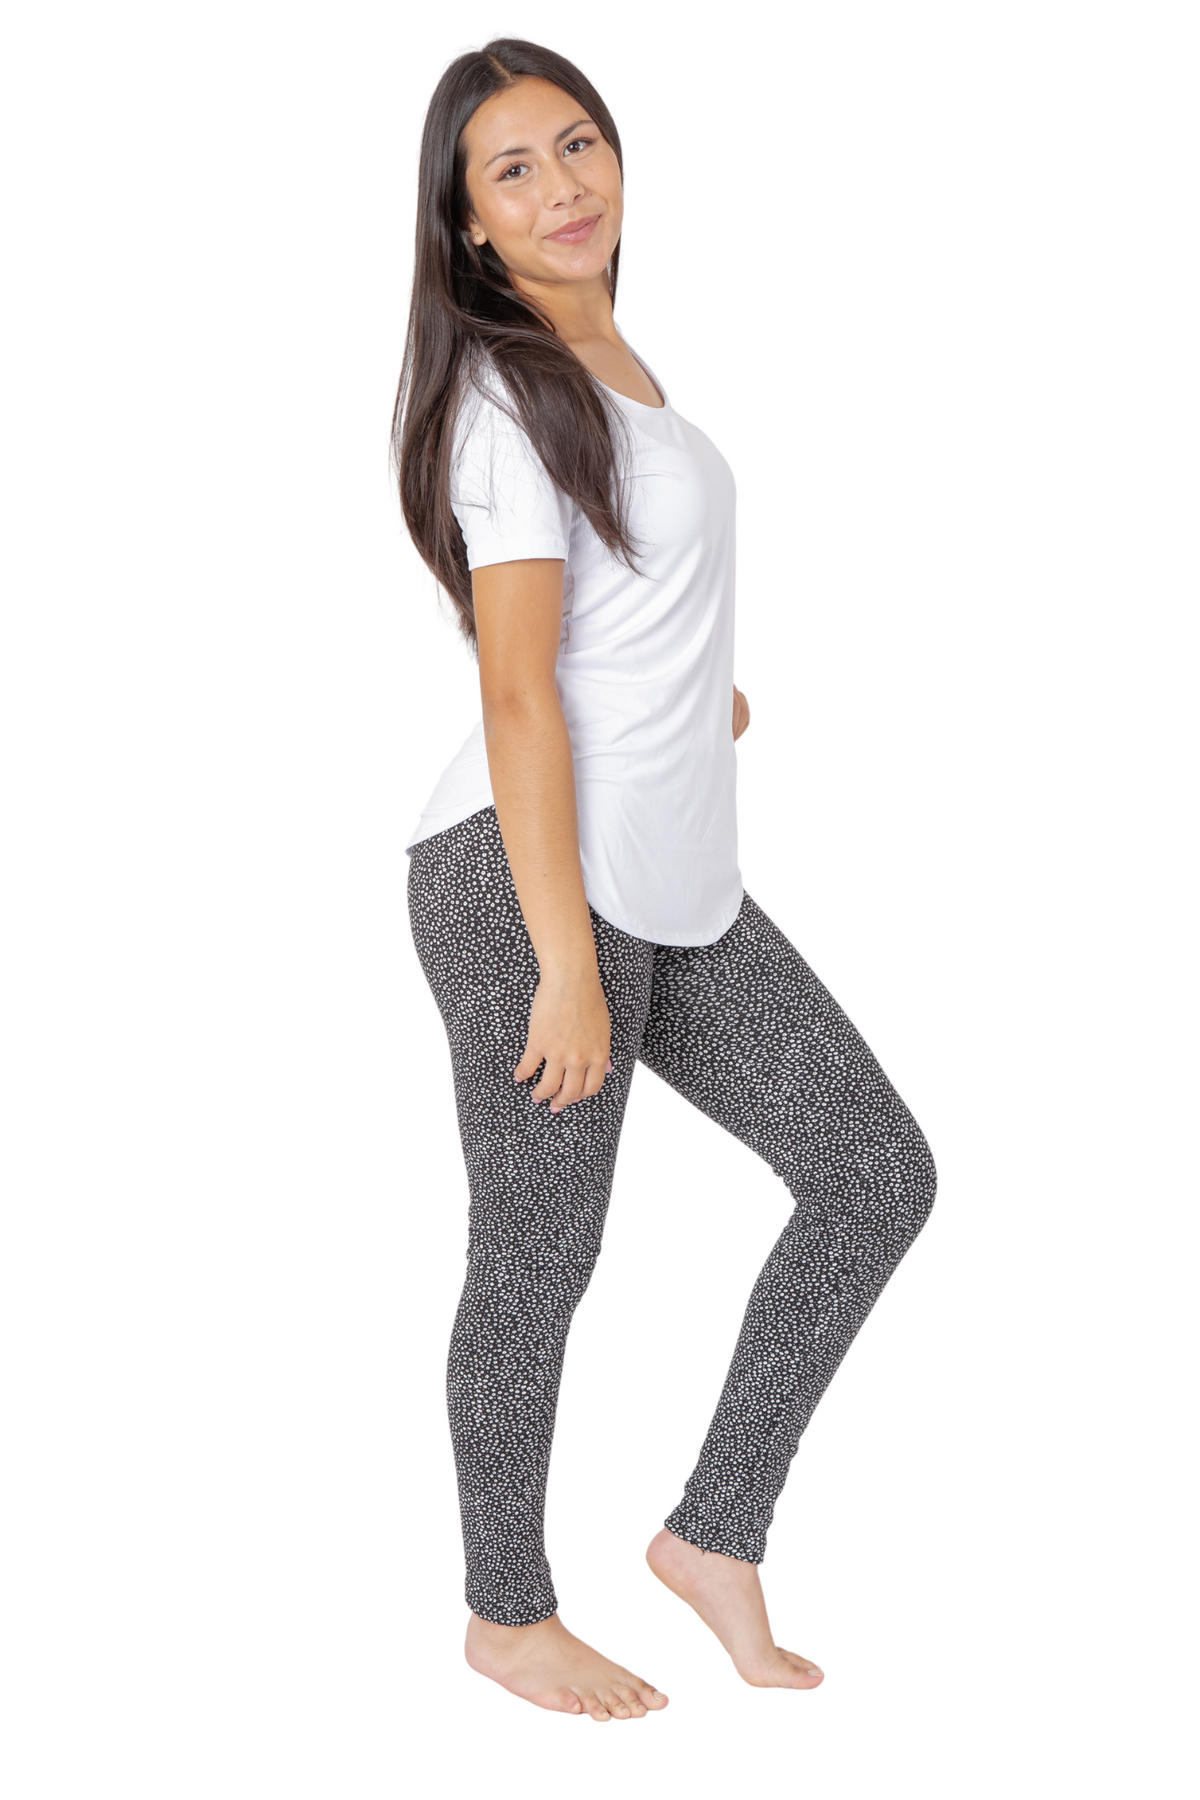 Stay cozy and stylish with our Comfy Non-Lined Leggings from Sofra - Mopas!  😍 Perfect for any occasion and only $9.74! 💸 #leggings